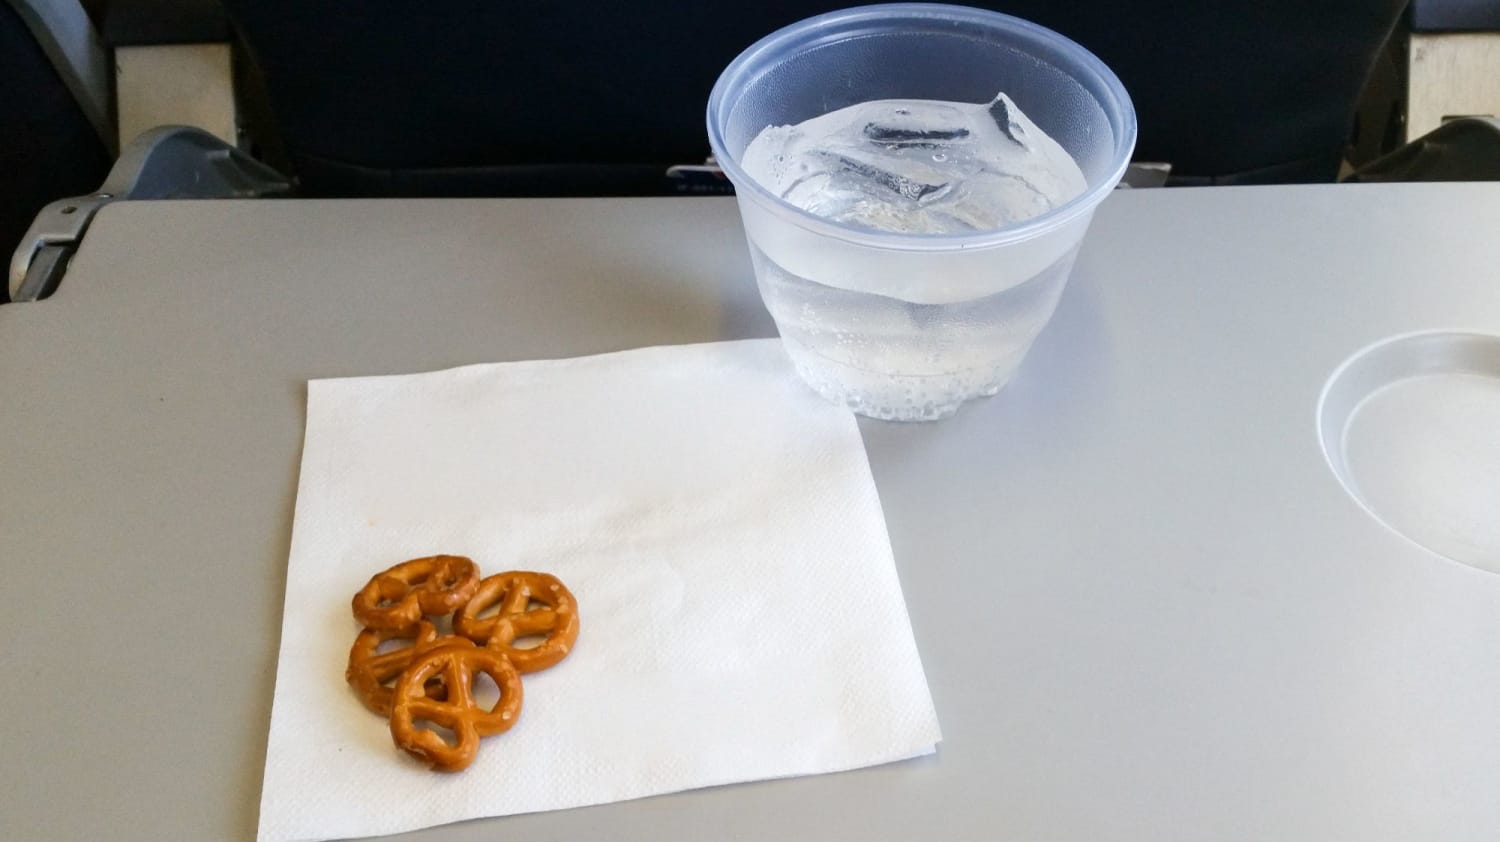 Frequent Travelers Can Get Their Mile-High Snack Fix With Airplane Food at Home